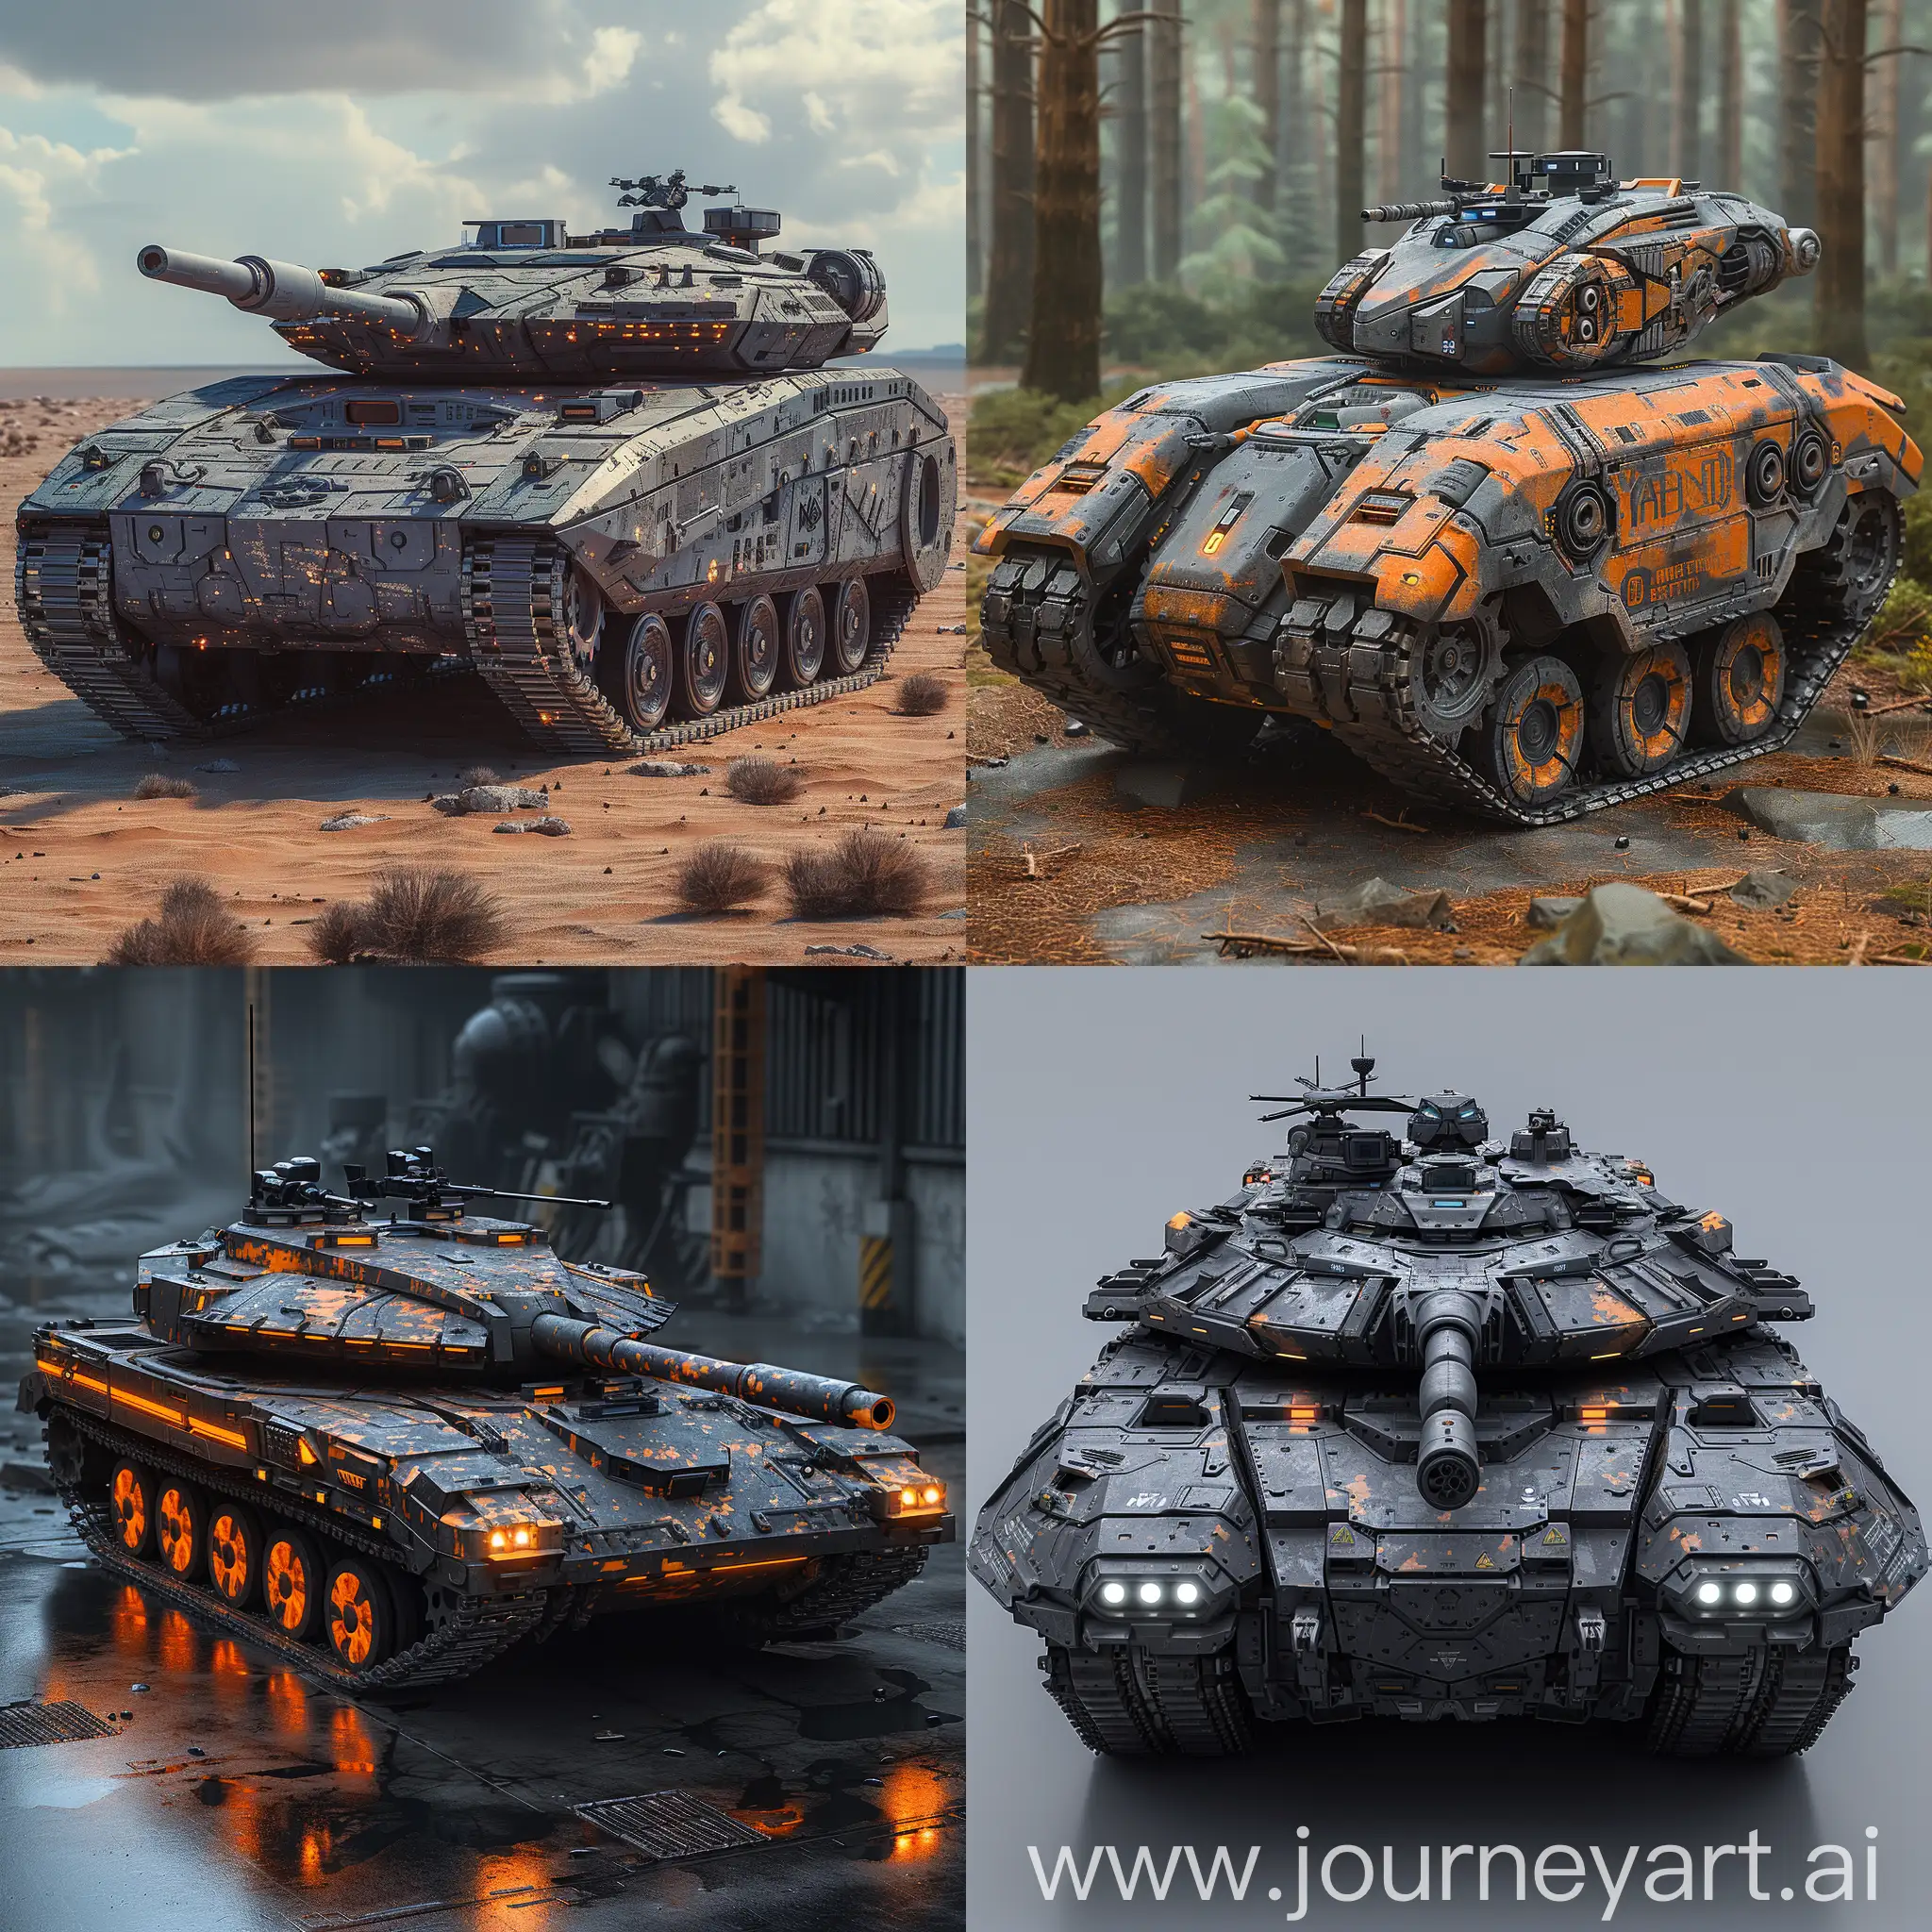 Futuristic-Tank-with-Advanced-AIDriven-Combat-Systems-and-Adaptive-Camouflage